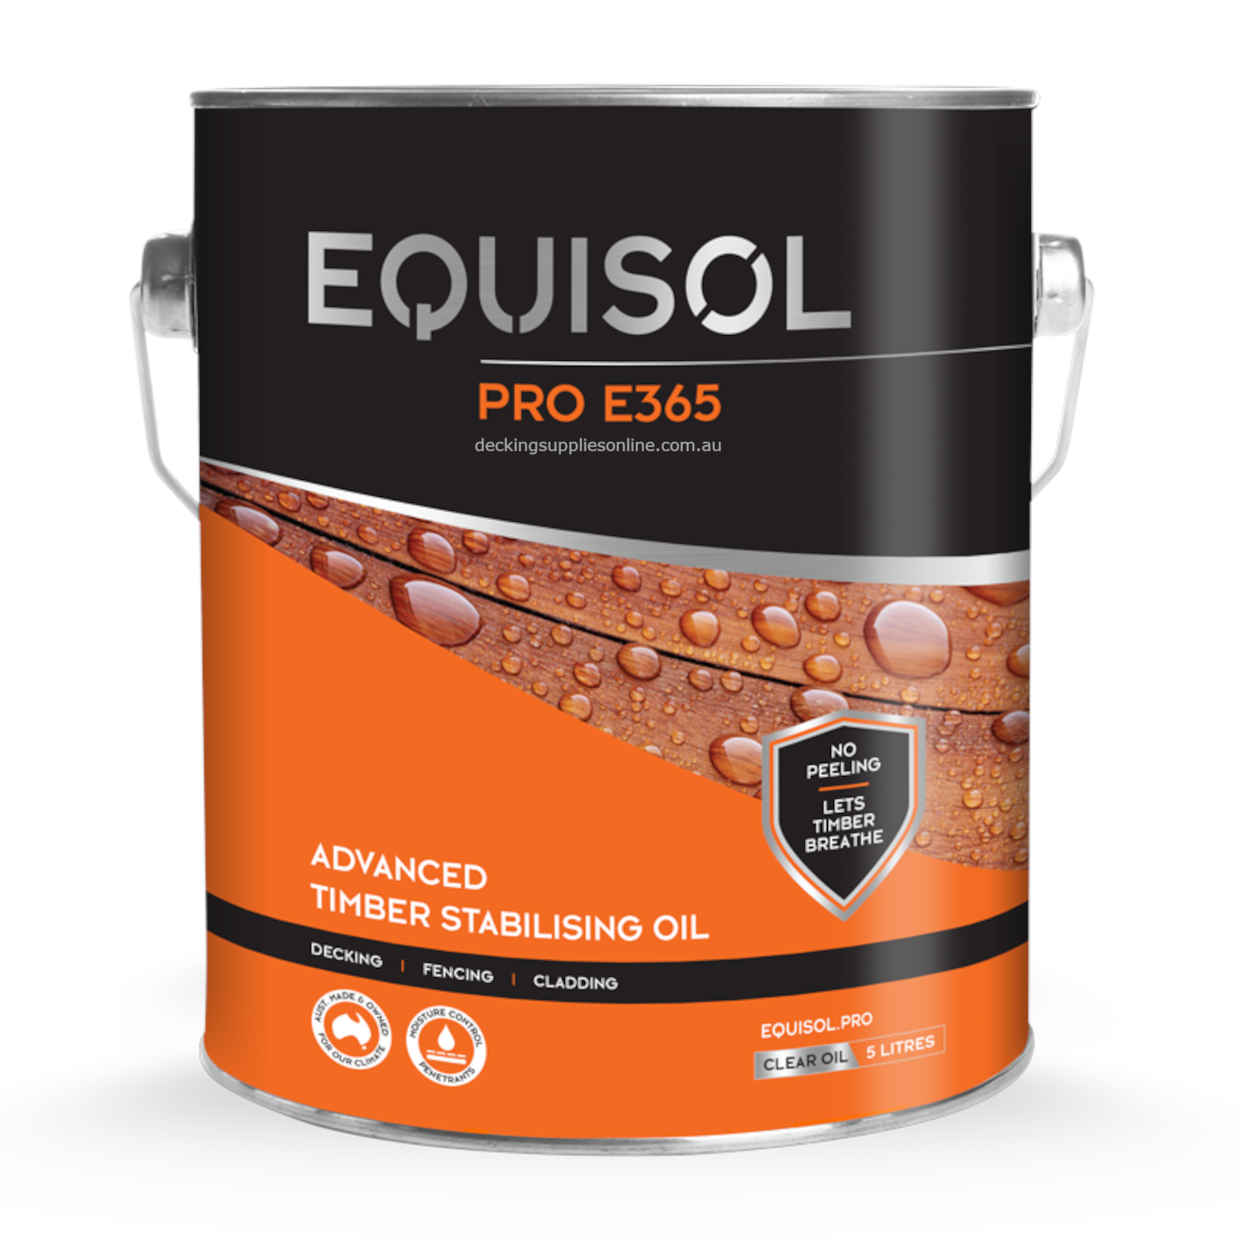 EQUISOL_Pro_365_5_Litre_Fast_Drying_Decking_Oil_Decking_Supplies_Online